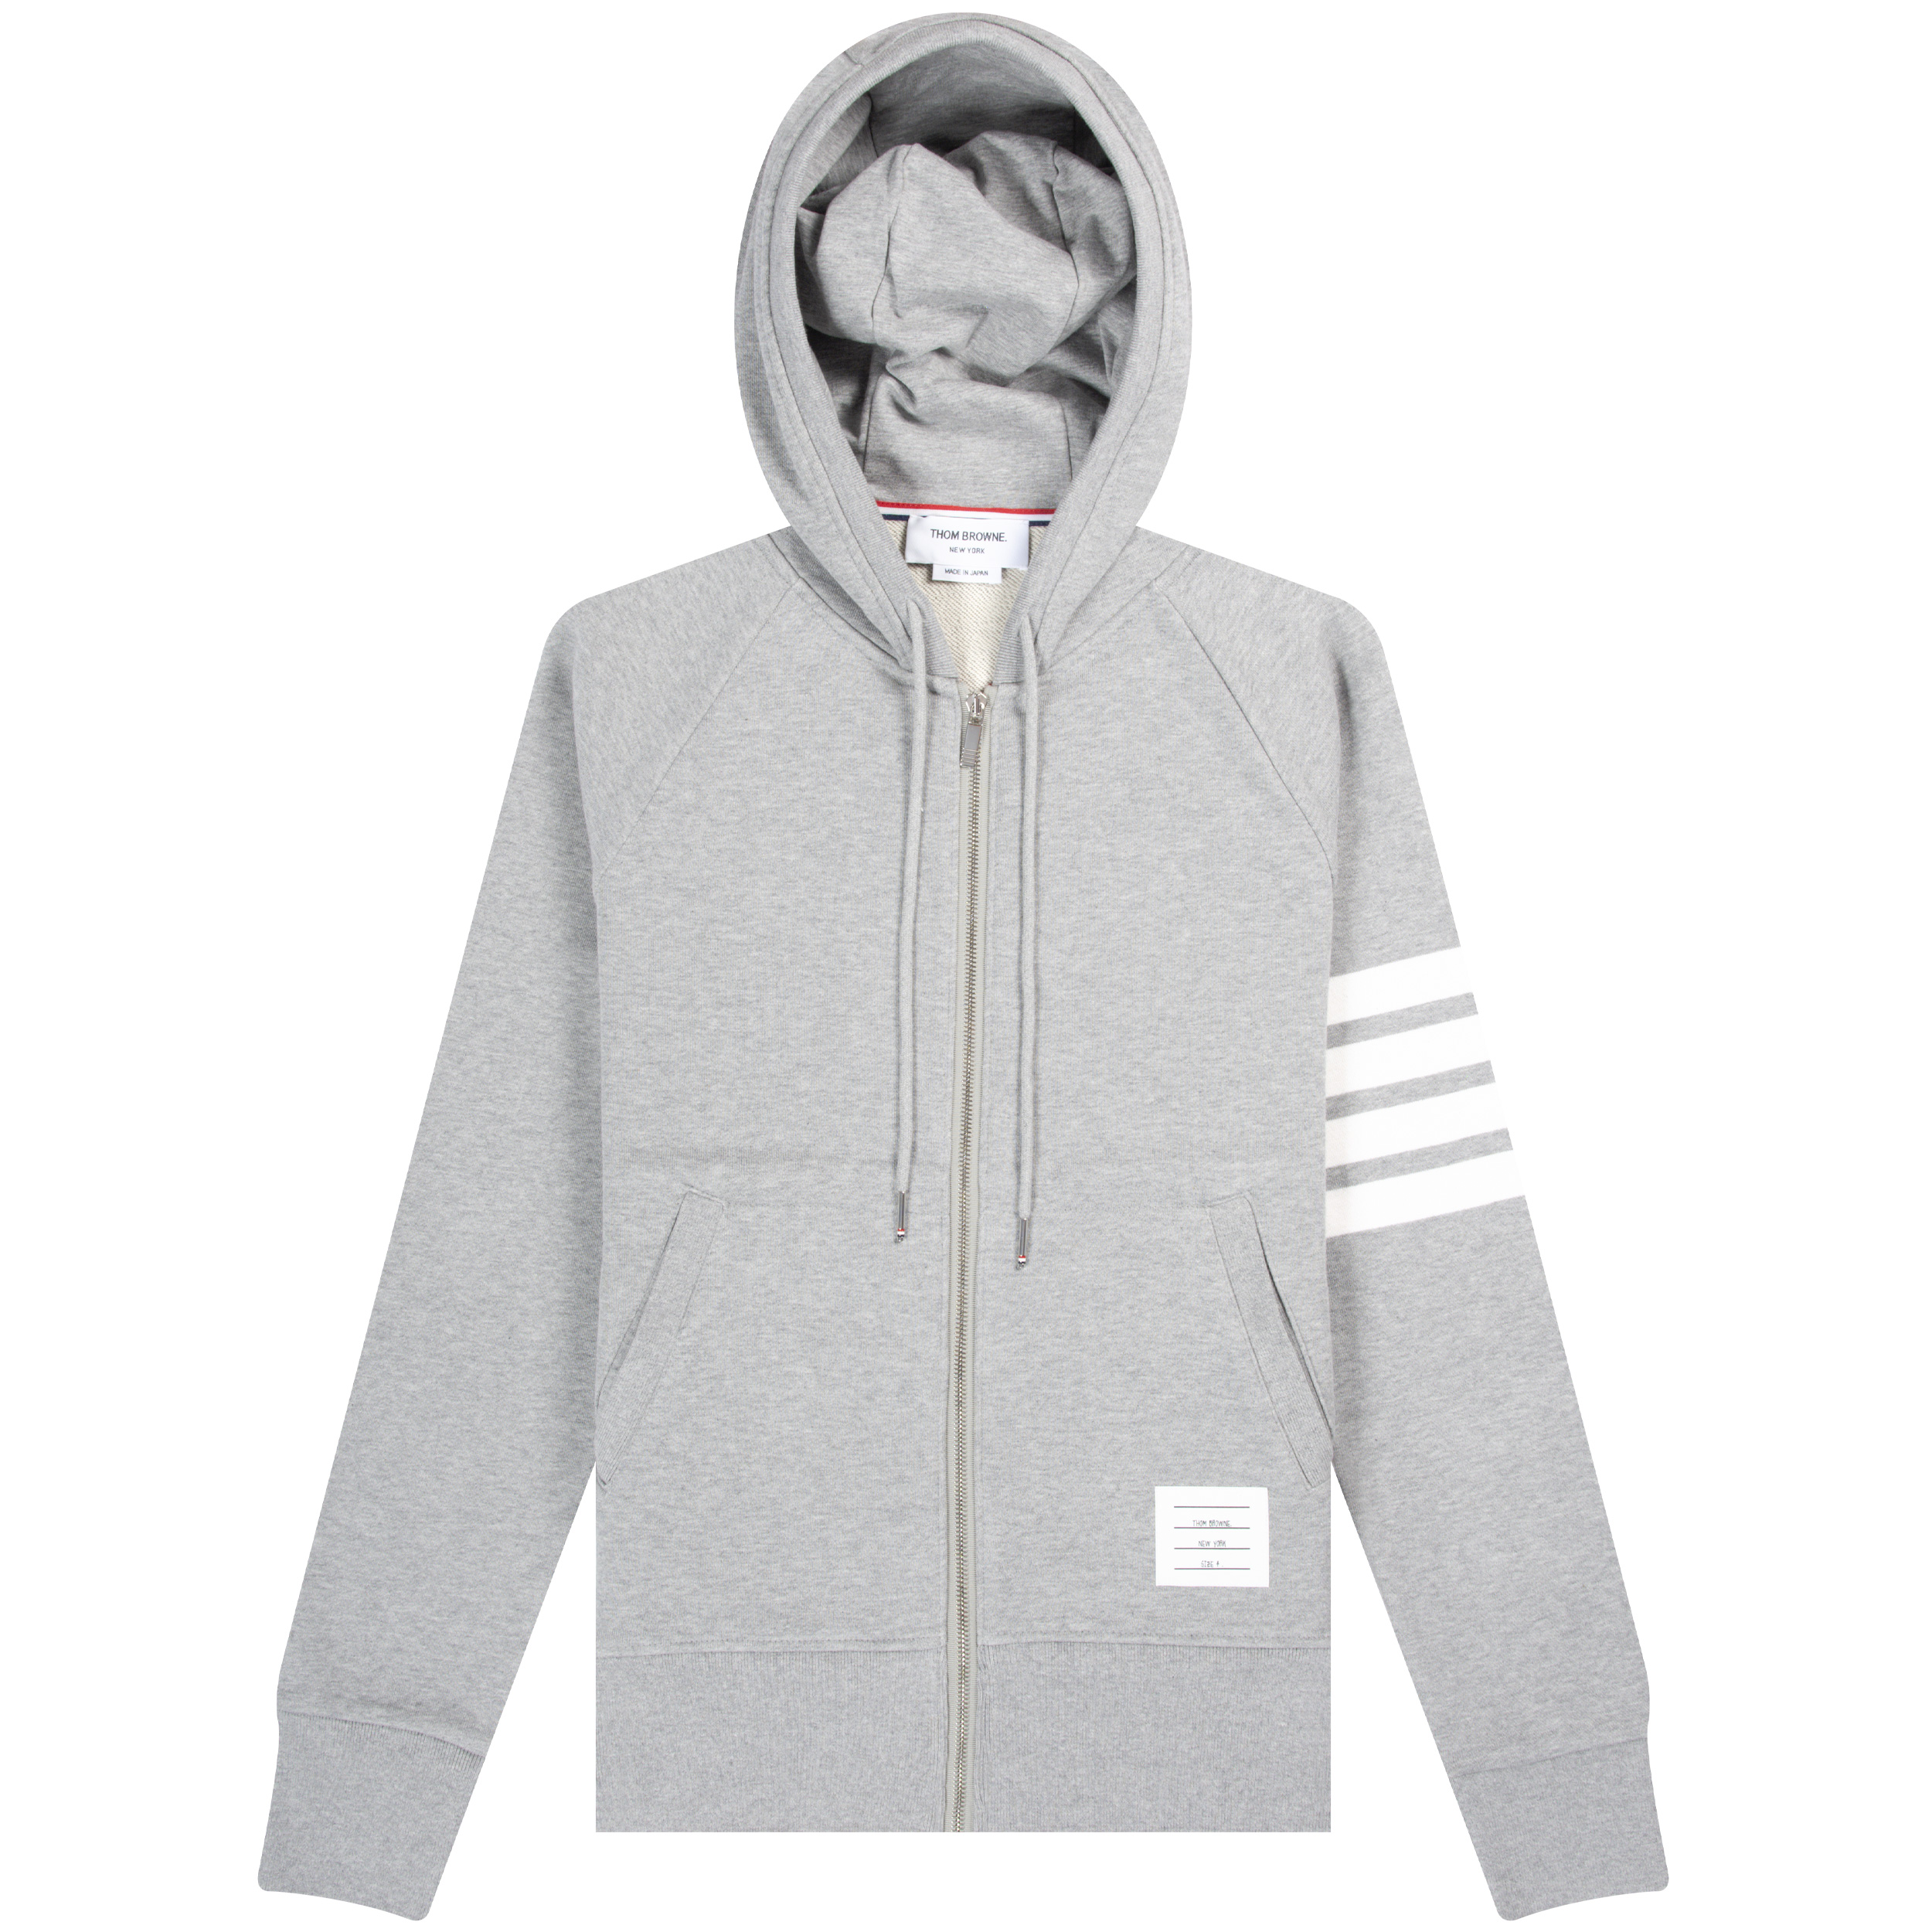 Thom Browne ’LOOPBACK JERSEY KNIT’ ENGINEERED 4-BAR CLASSIC HOODIE LIGHT GREY